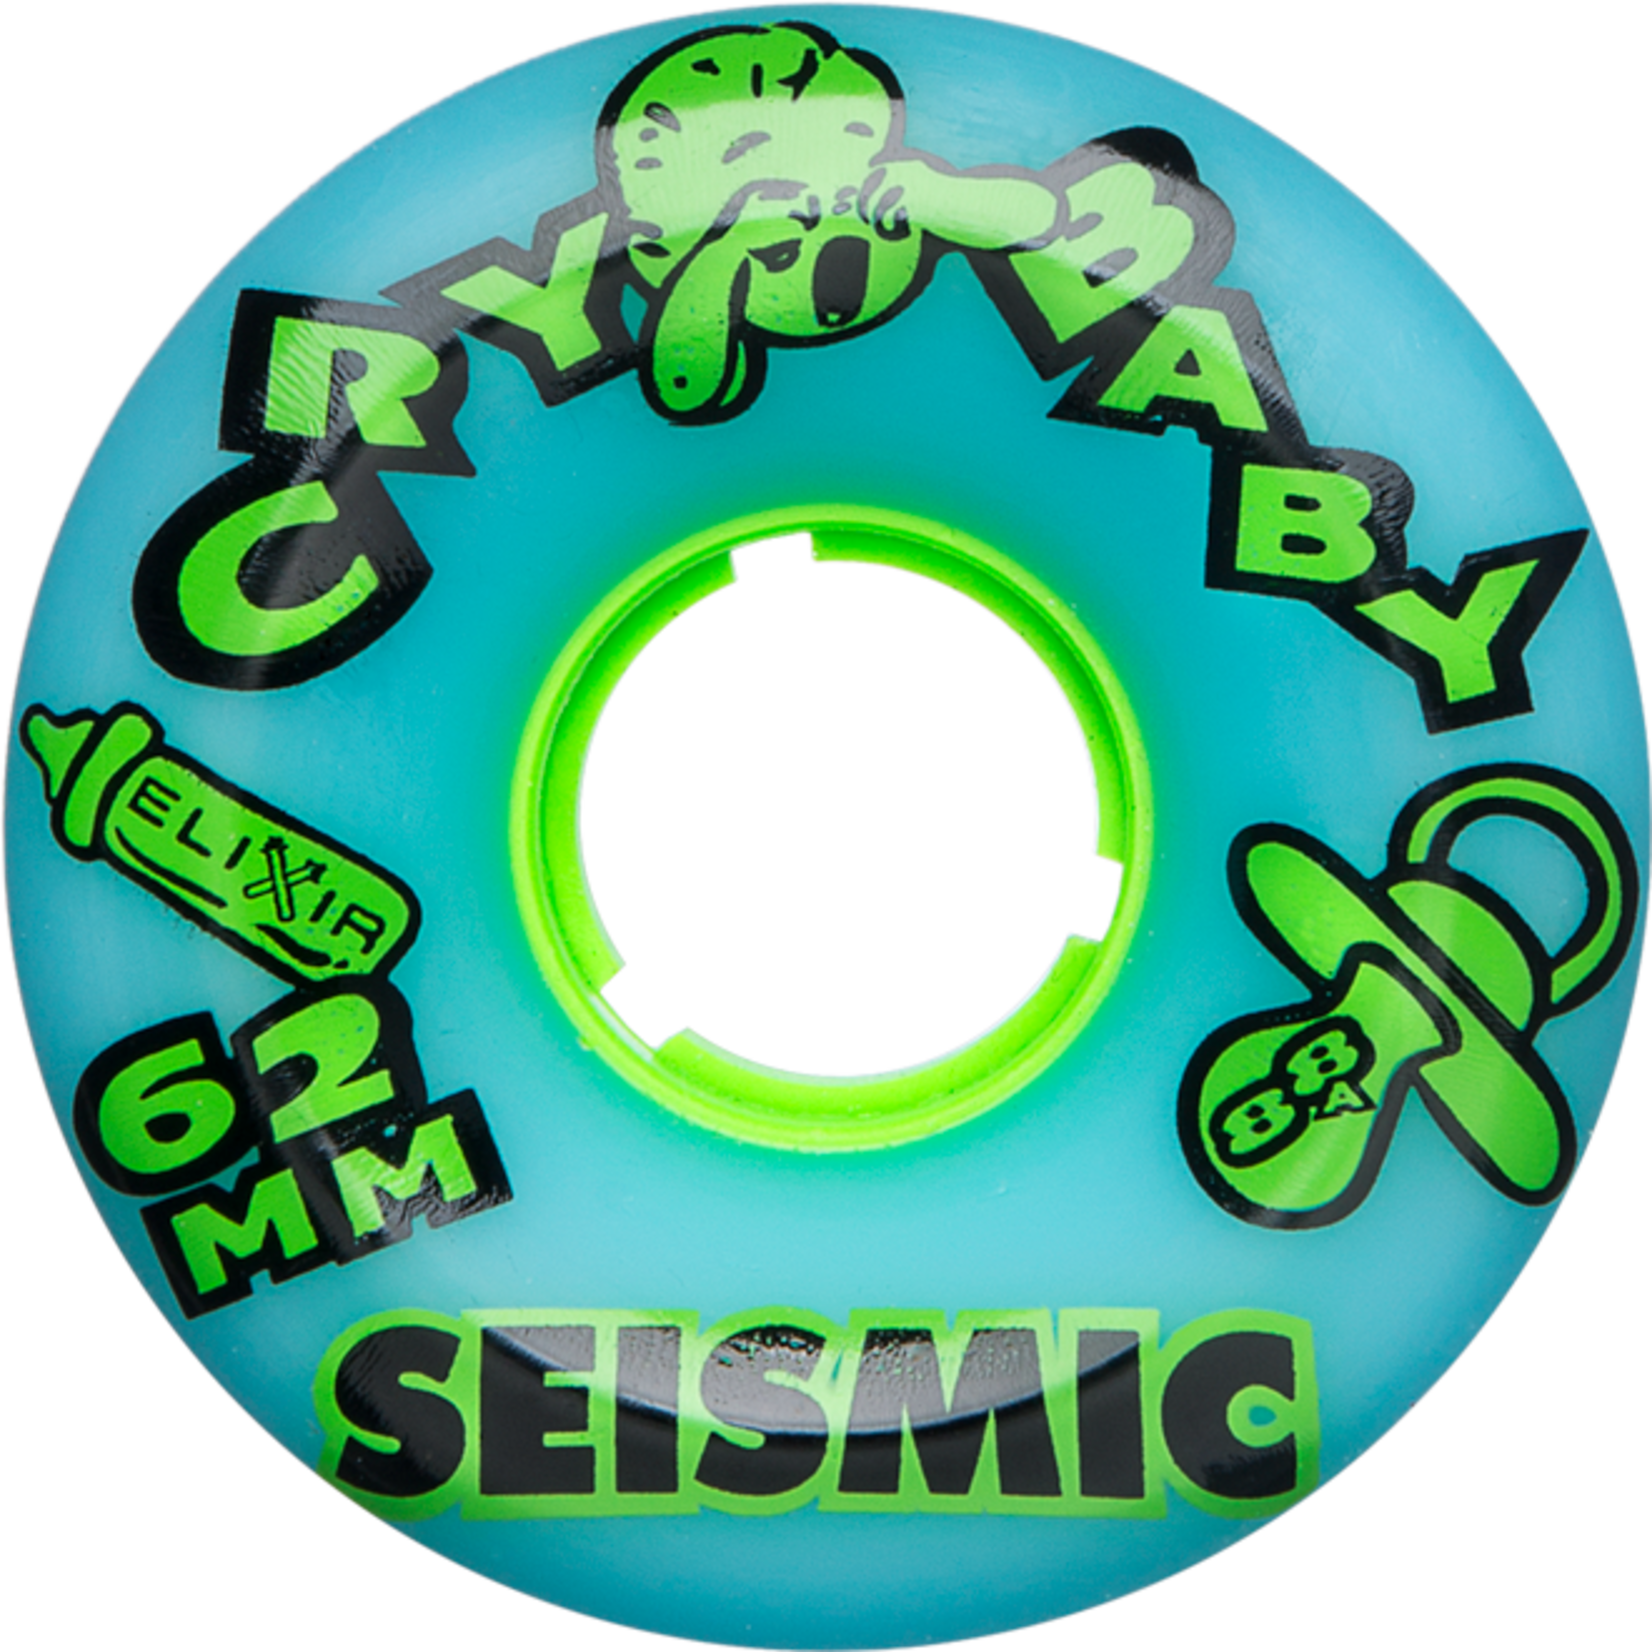 Seismic Skate Systems Crybaby 62mm